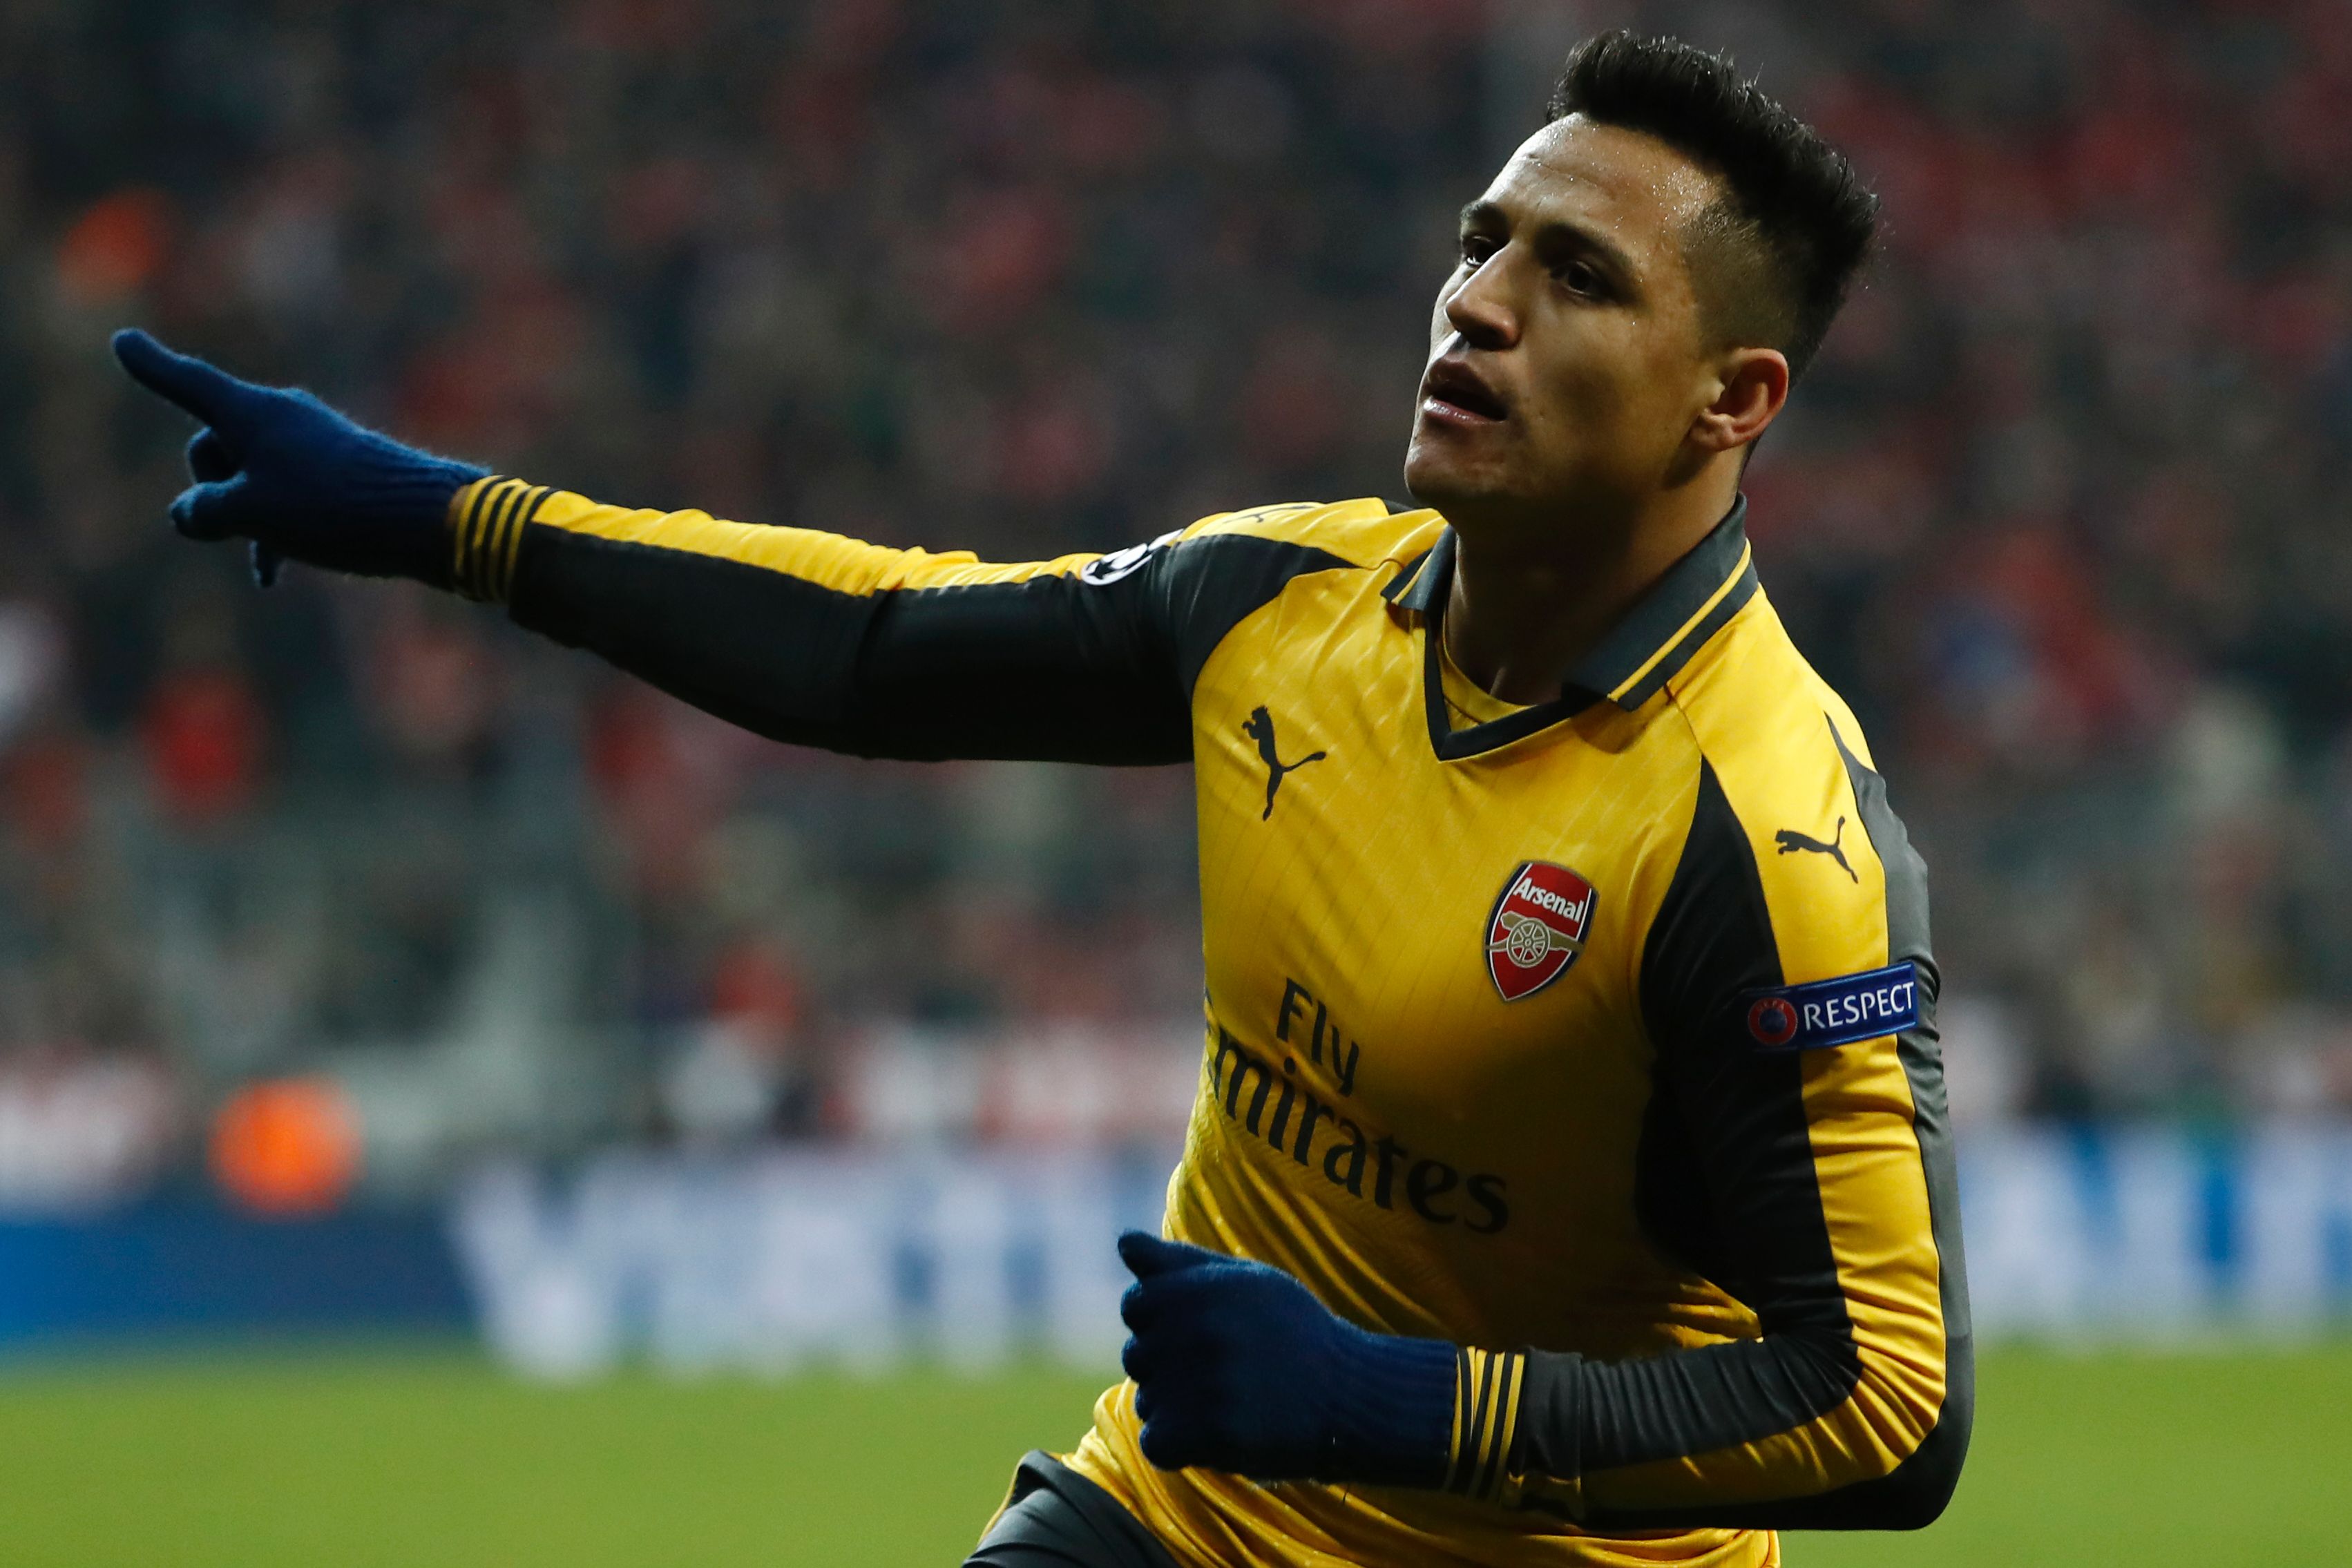 Arsenal's Chilean striker Alexis Sanchez celebrates scoring the 1-1 goal during the UEFA Champions League round of sixteen football match between FC Bayern Munich and Arsenal in Munich, southern Germany, on February 15, 2017.  / AFP / Odd ANDERSEN        (Photo credit should read ODD ANDERSEN/AFP/Getty Images)